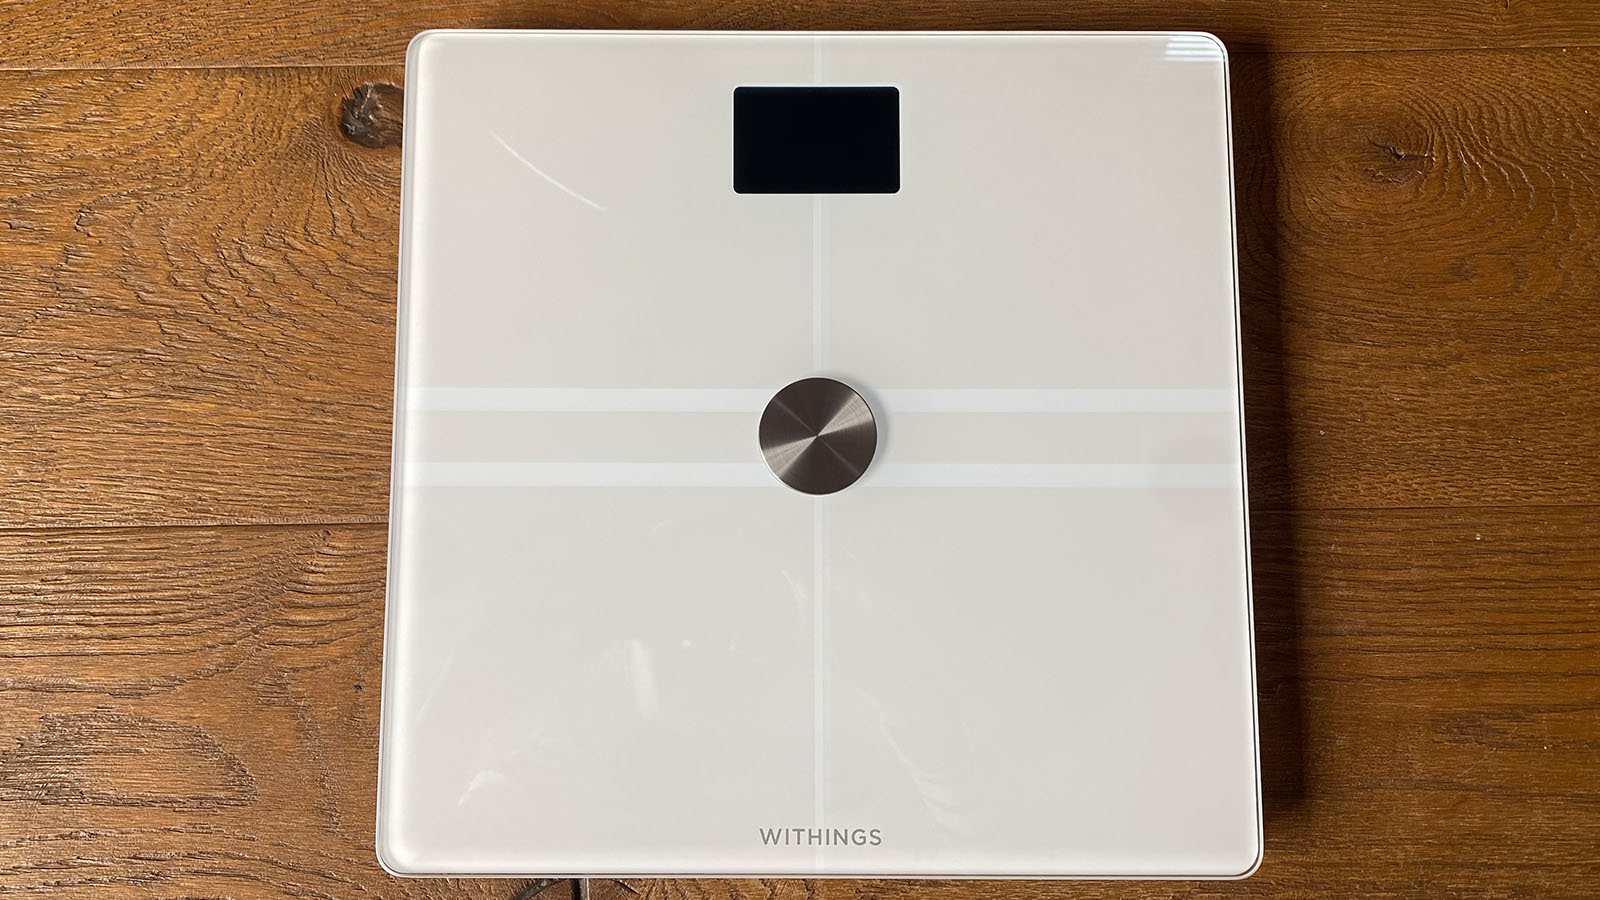  Withings Body Comp – Best overall